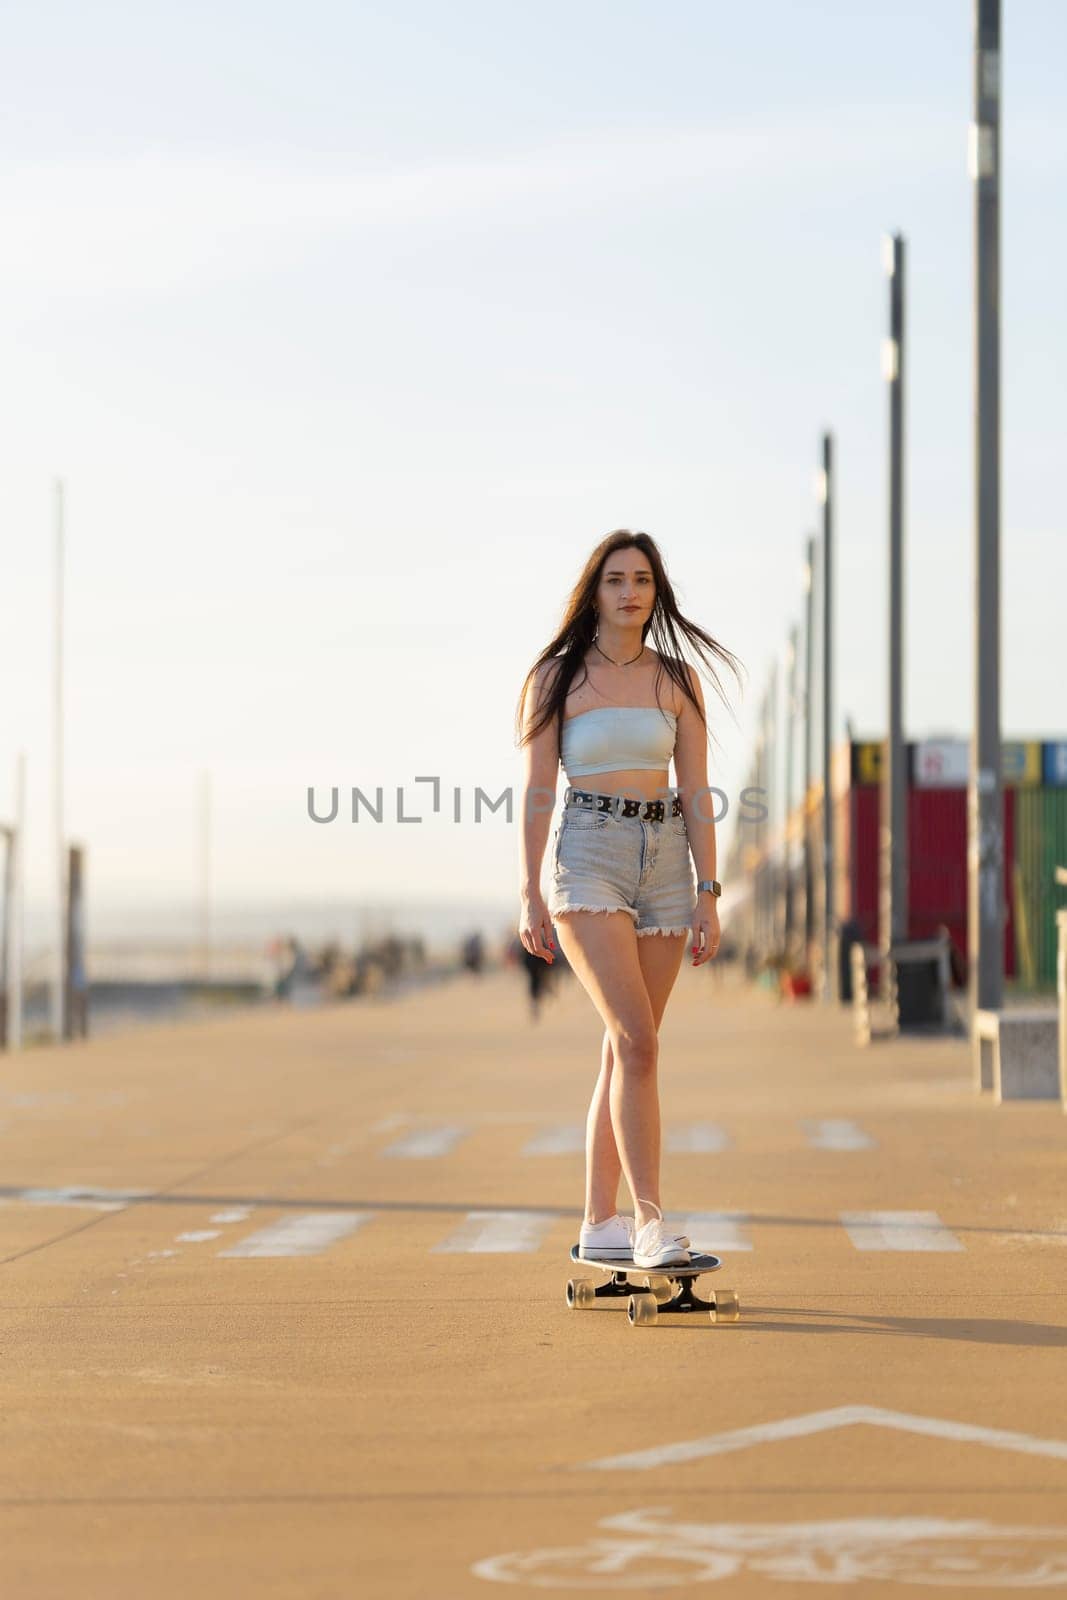 A woman is skateboarding down a street. She is wearing a blue shirt and shorts